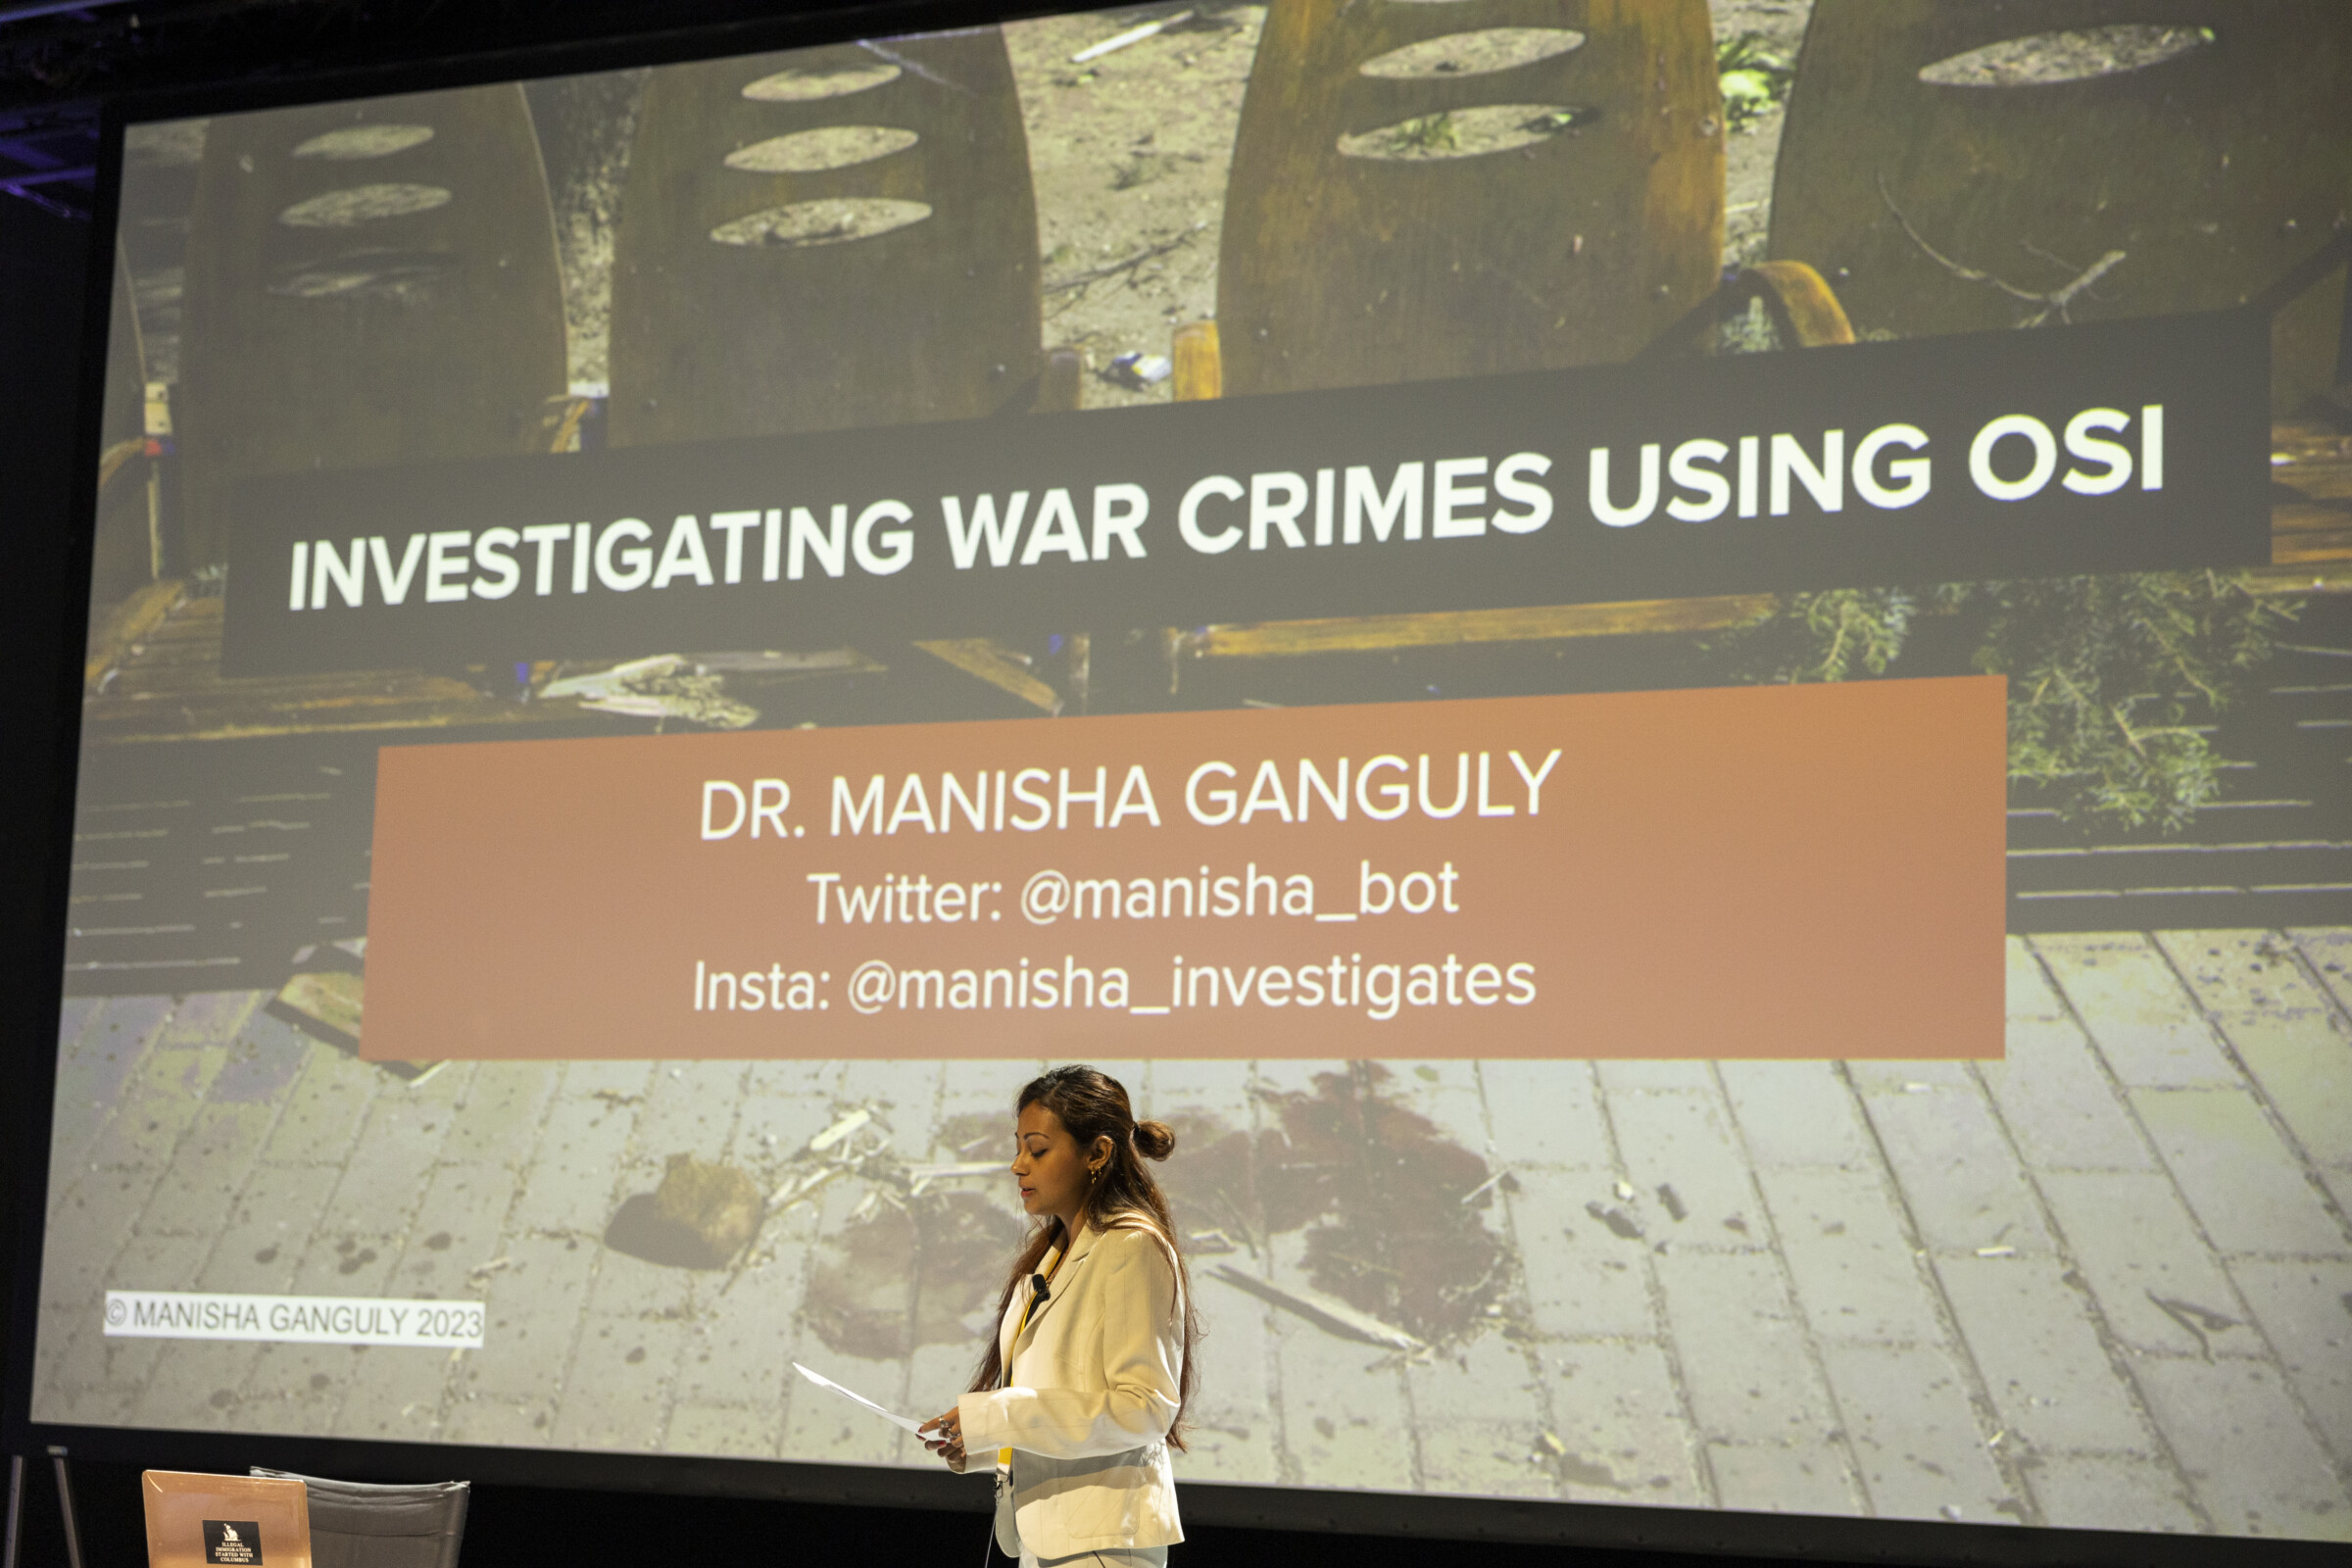 This photo shows Manisha Ganguly during the presentation of her workshop "Investigating war crimes using OSINT", in the framework of the iMEdD International Journalism Forum. On the back is a slide with the title of the workshop and Manisha Ganguli's name and contact details.